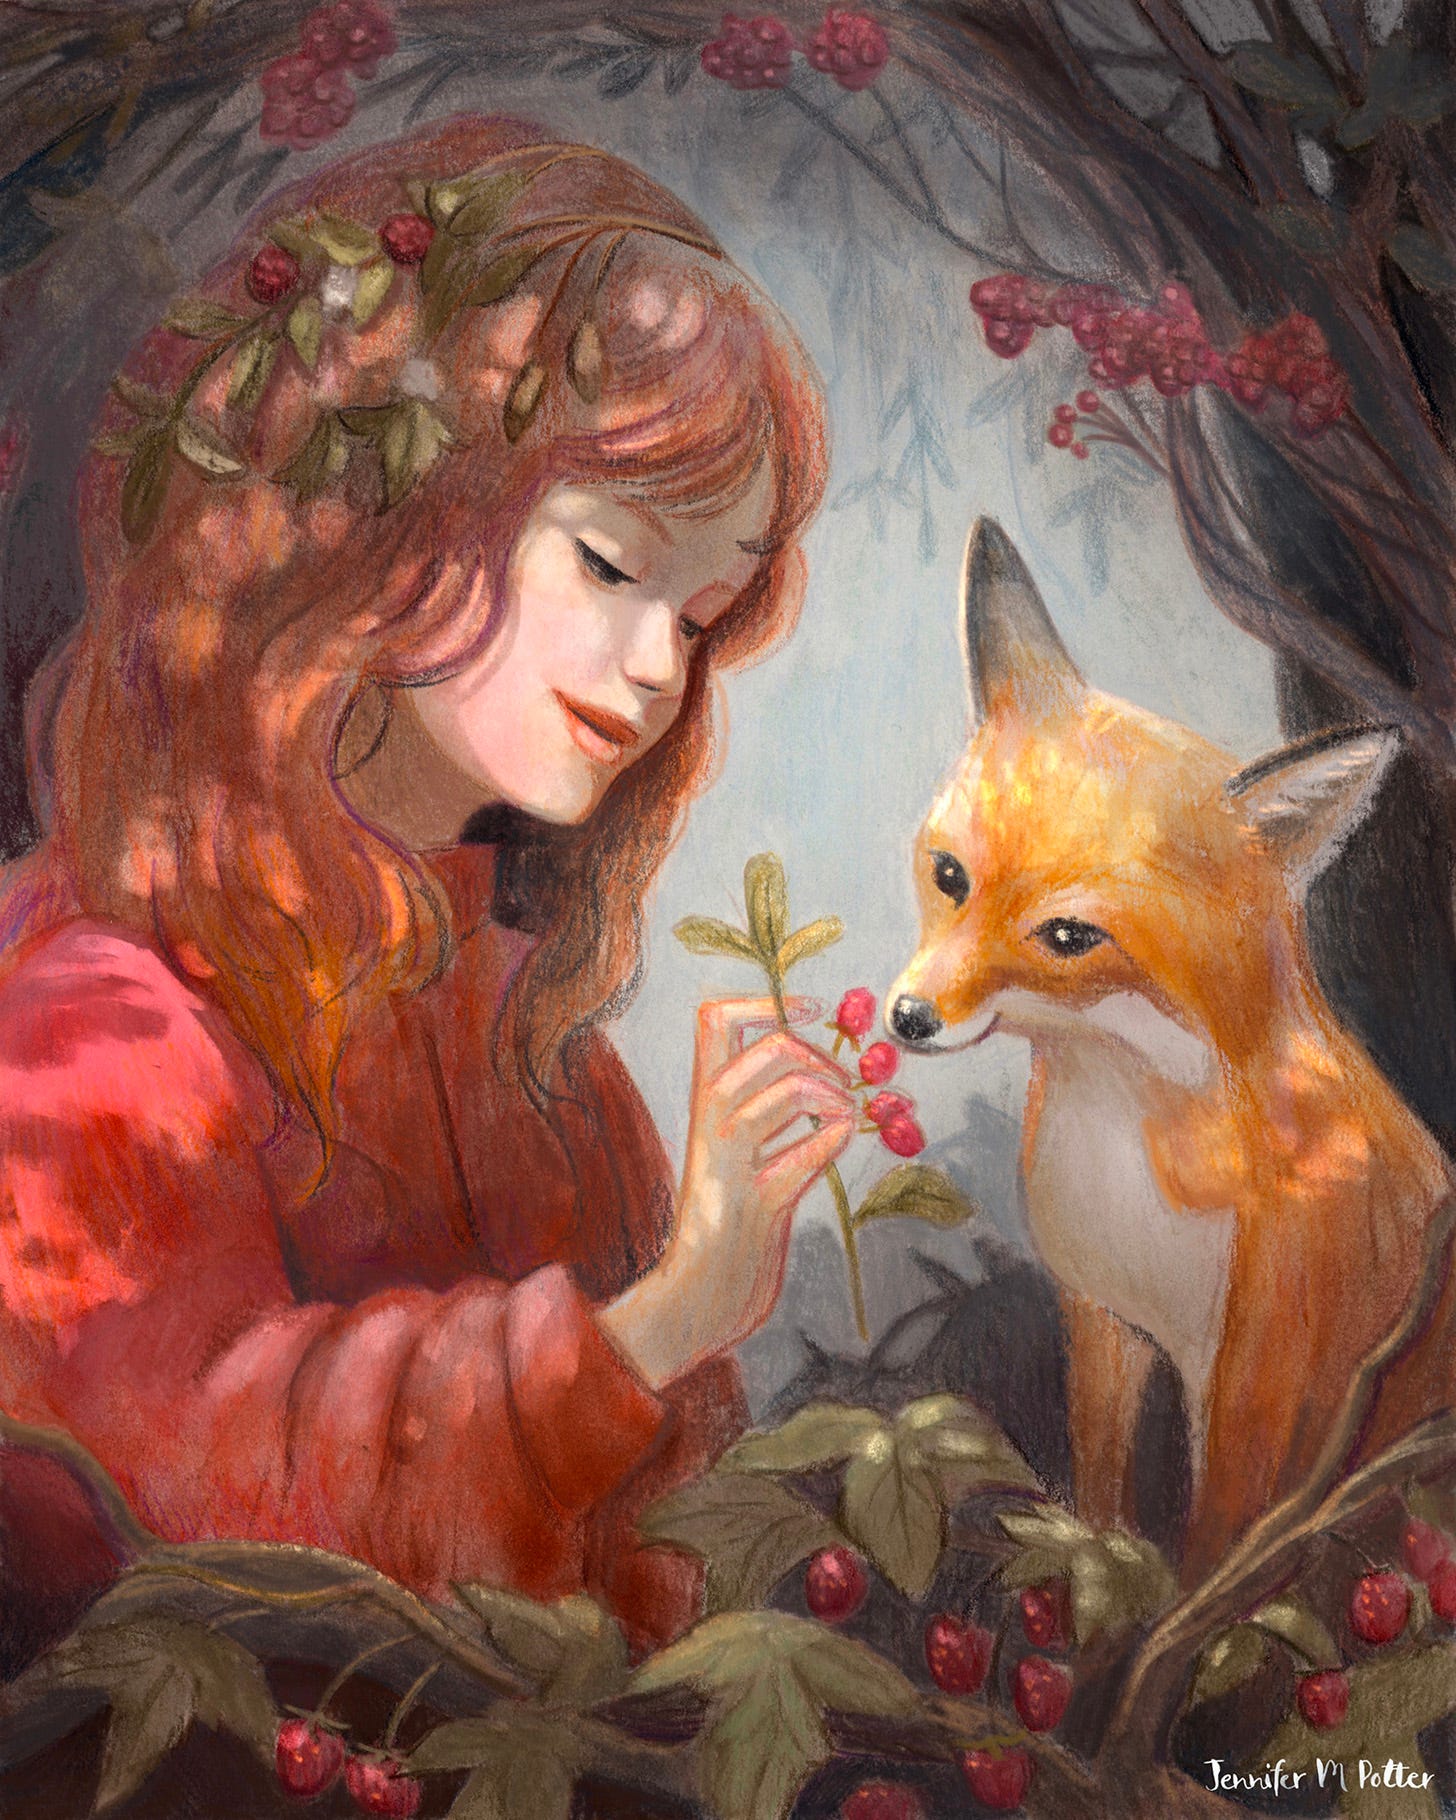 Illustration by Jennifer M Potter of a red-haired girl feeding raspberries to a fox